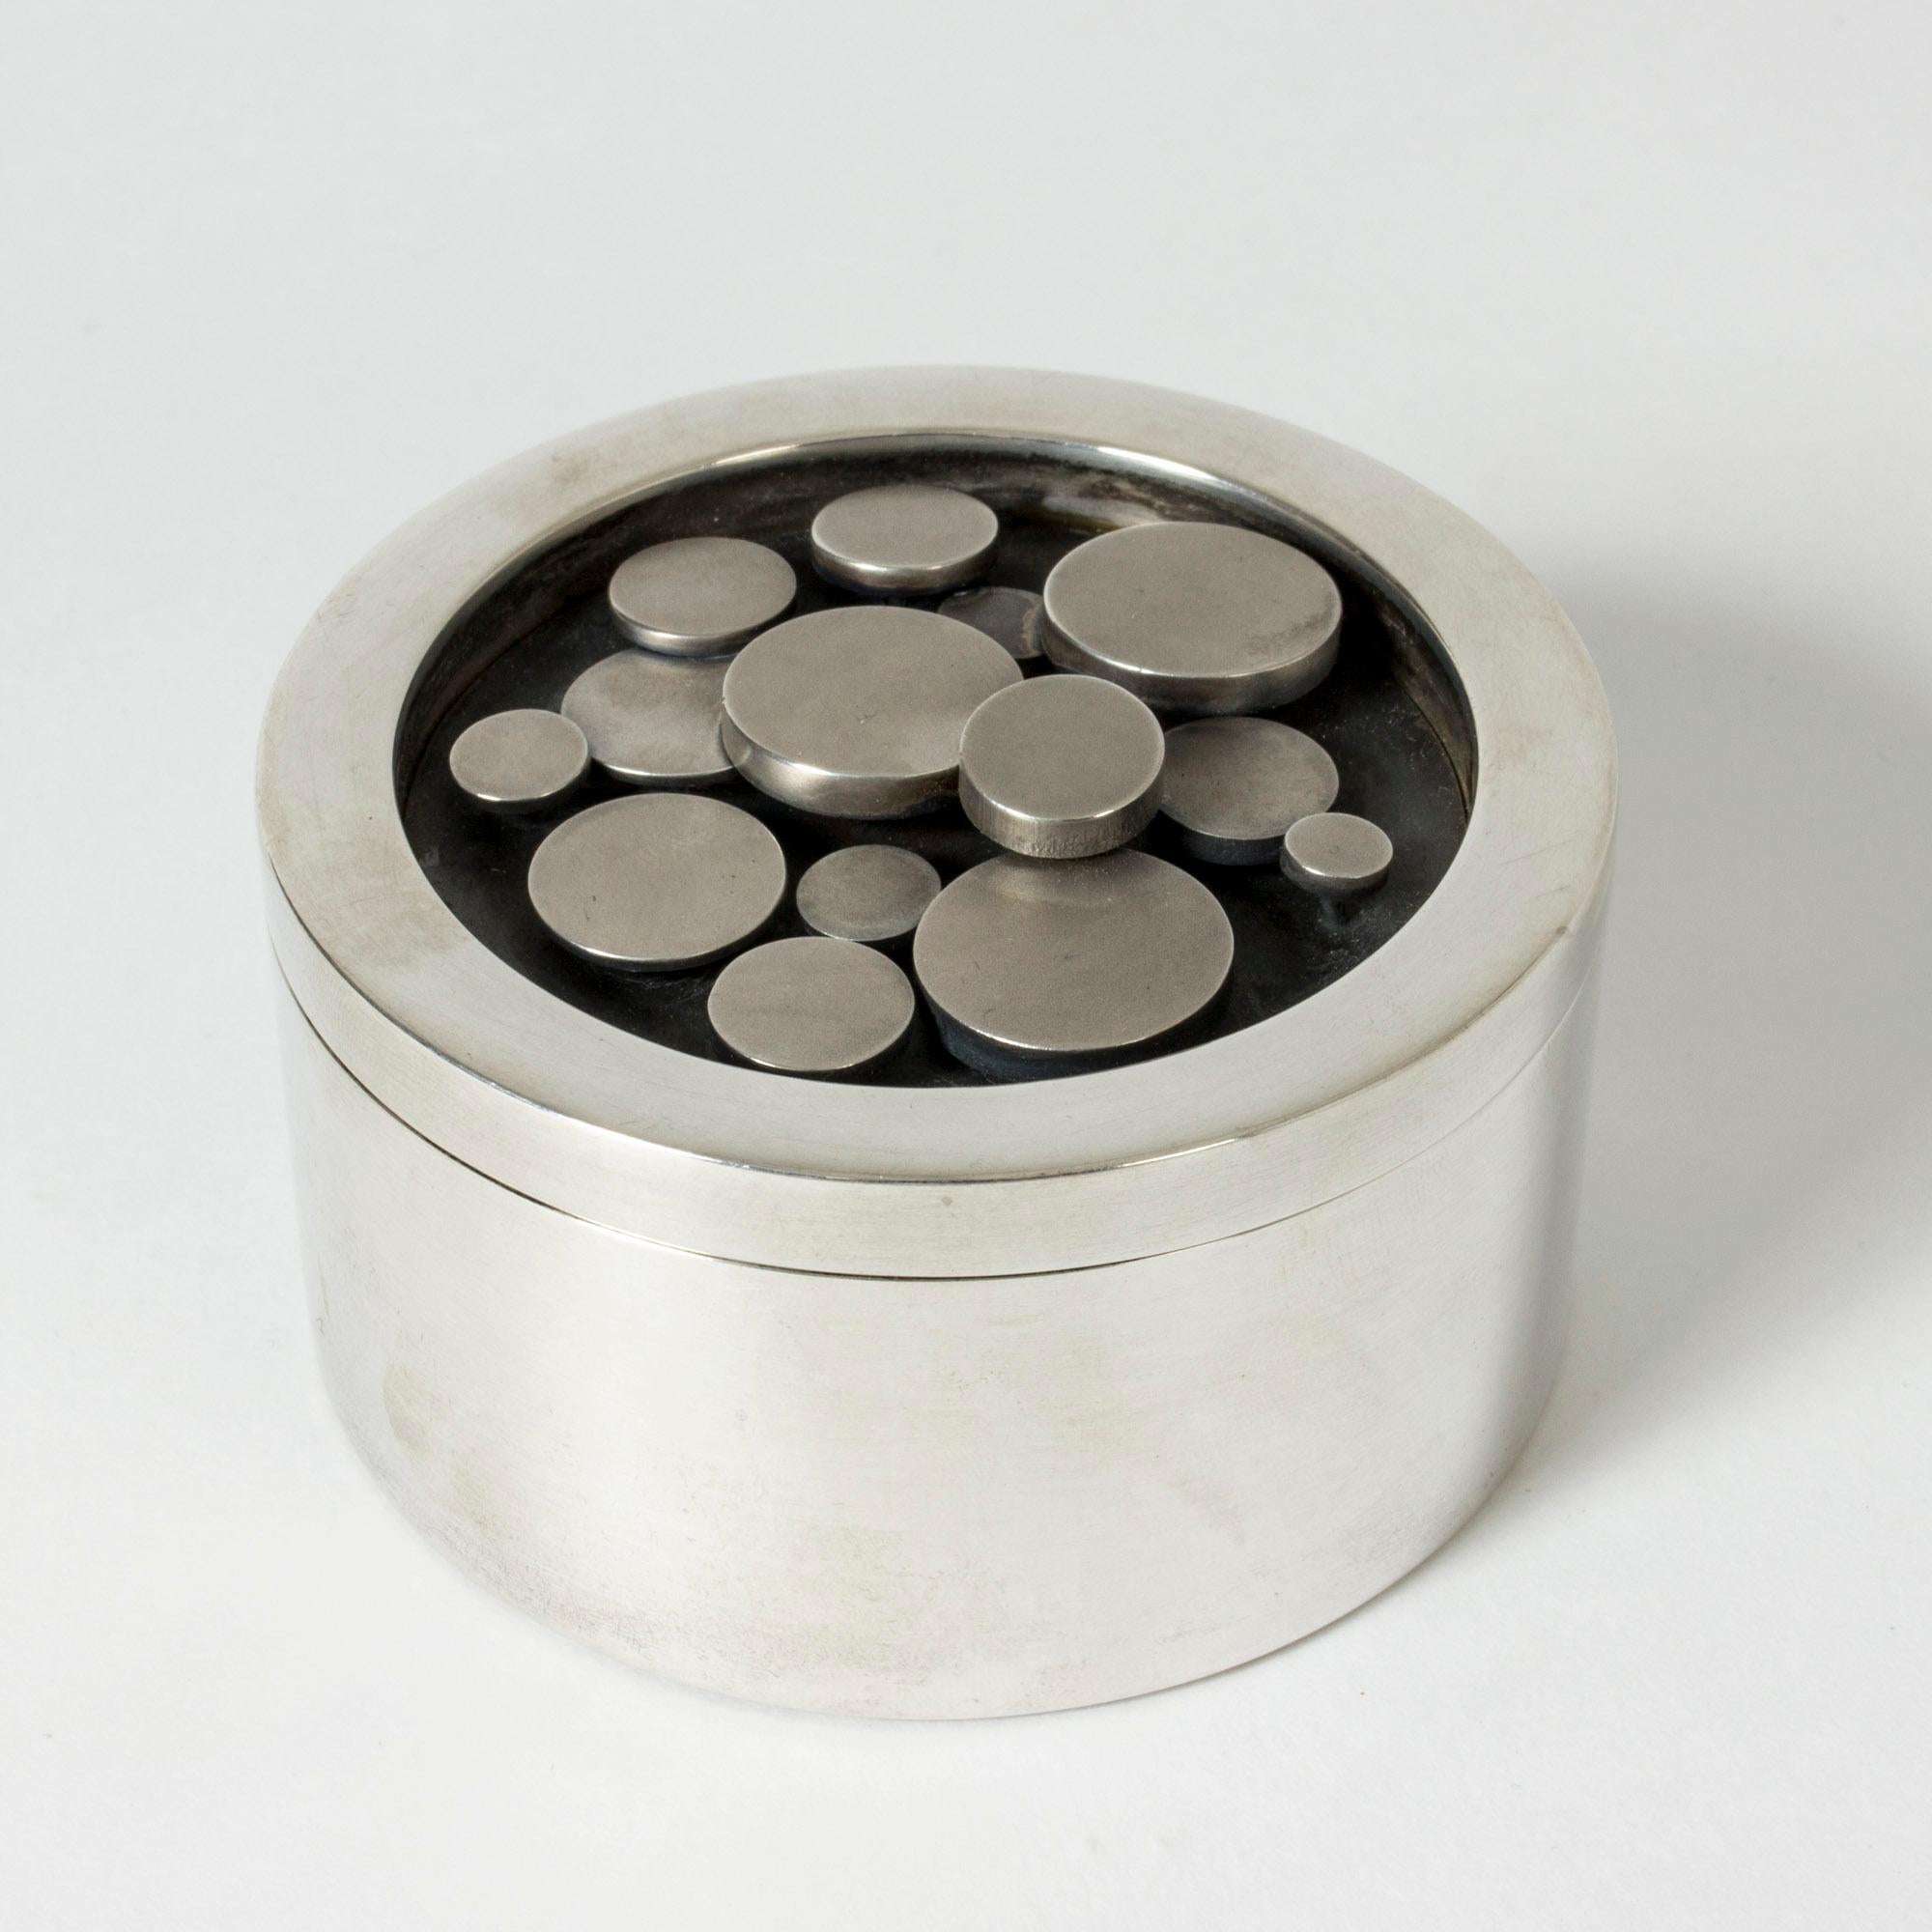 Exquisite silver jar from Atelier Borgila, with a gilded inside and a pattern of silver discs on the lid. Blackened silver backdrop to the discs.